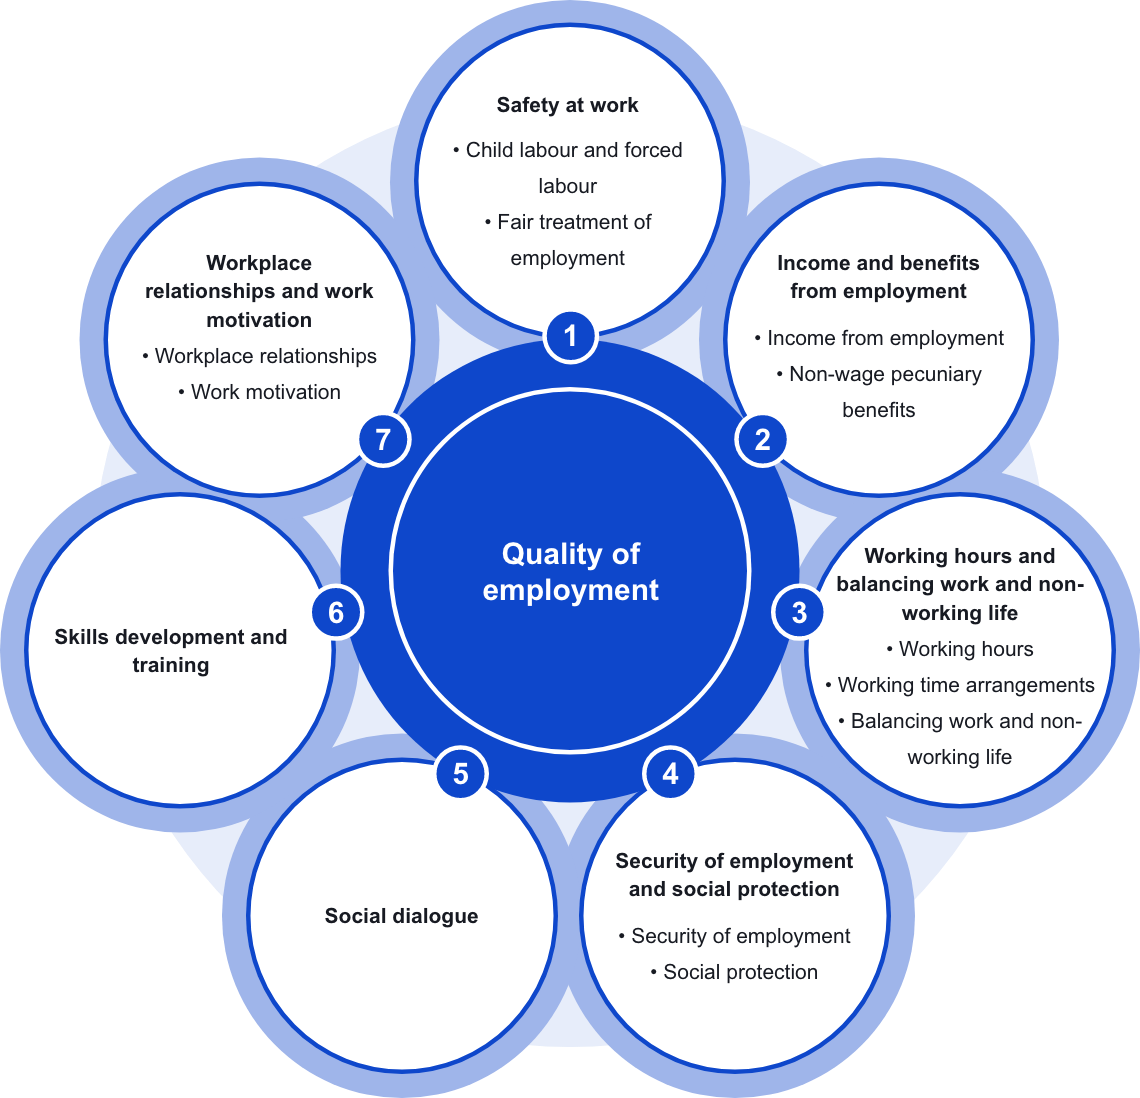 There are 7 different dimensions which are relevant for assessing the quality of employment. These are:
1.	safety and ethics of employment, which includes safety at work, child labour as well as fair treatment of employment
2.	income and benefits from employment, comprising the income as well as the non-wage benefits of employment
3.	working hours and balancing work and non-working life
4.	security of employment and the social protection
5.	social dialogue
6.	skills development and training
7.	workplace relationships and work motivation                                                                              These aspects combined form the multidimensional concept of quality of employment.